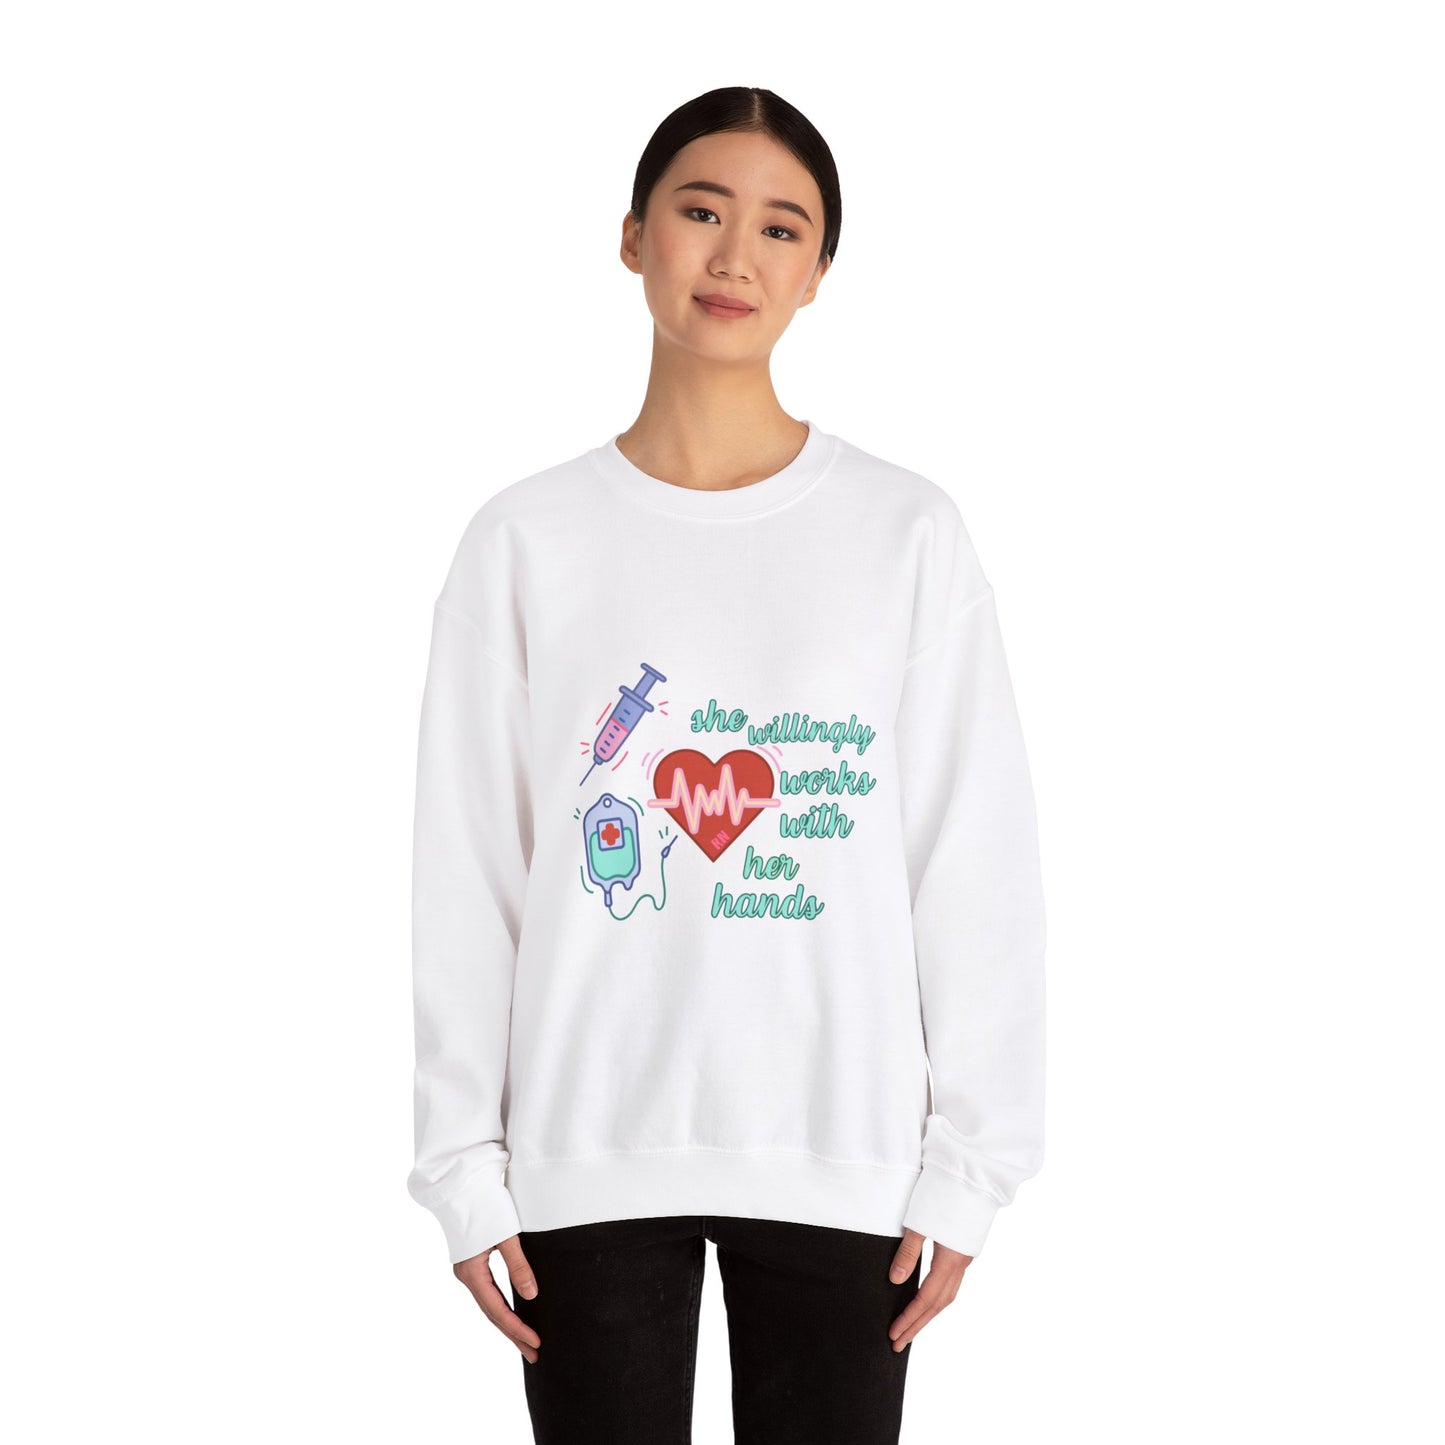 She Willingly Works with Her Hands Sweatshirt